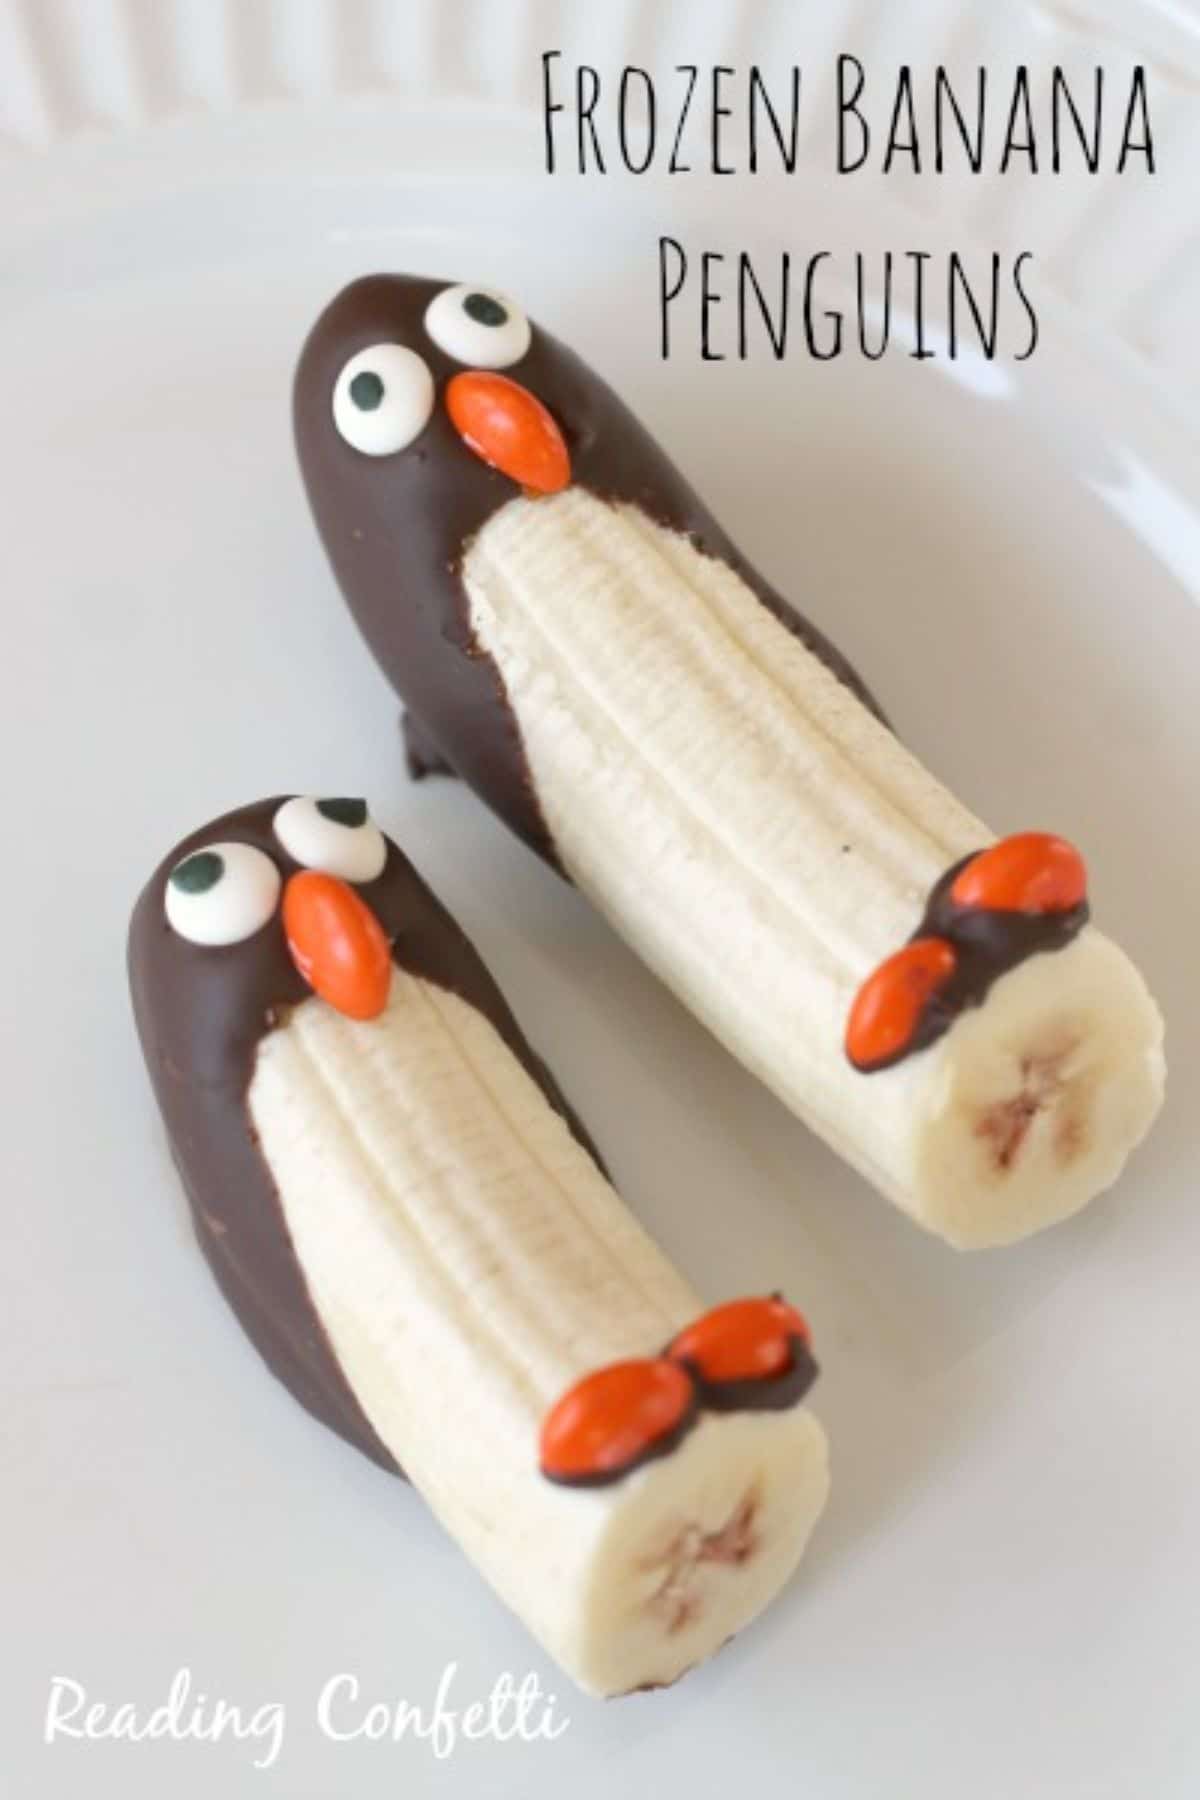 The text reads £Frozen banana penguins". The image is of twohalf bananas decorated to look like penguins